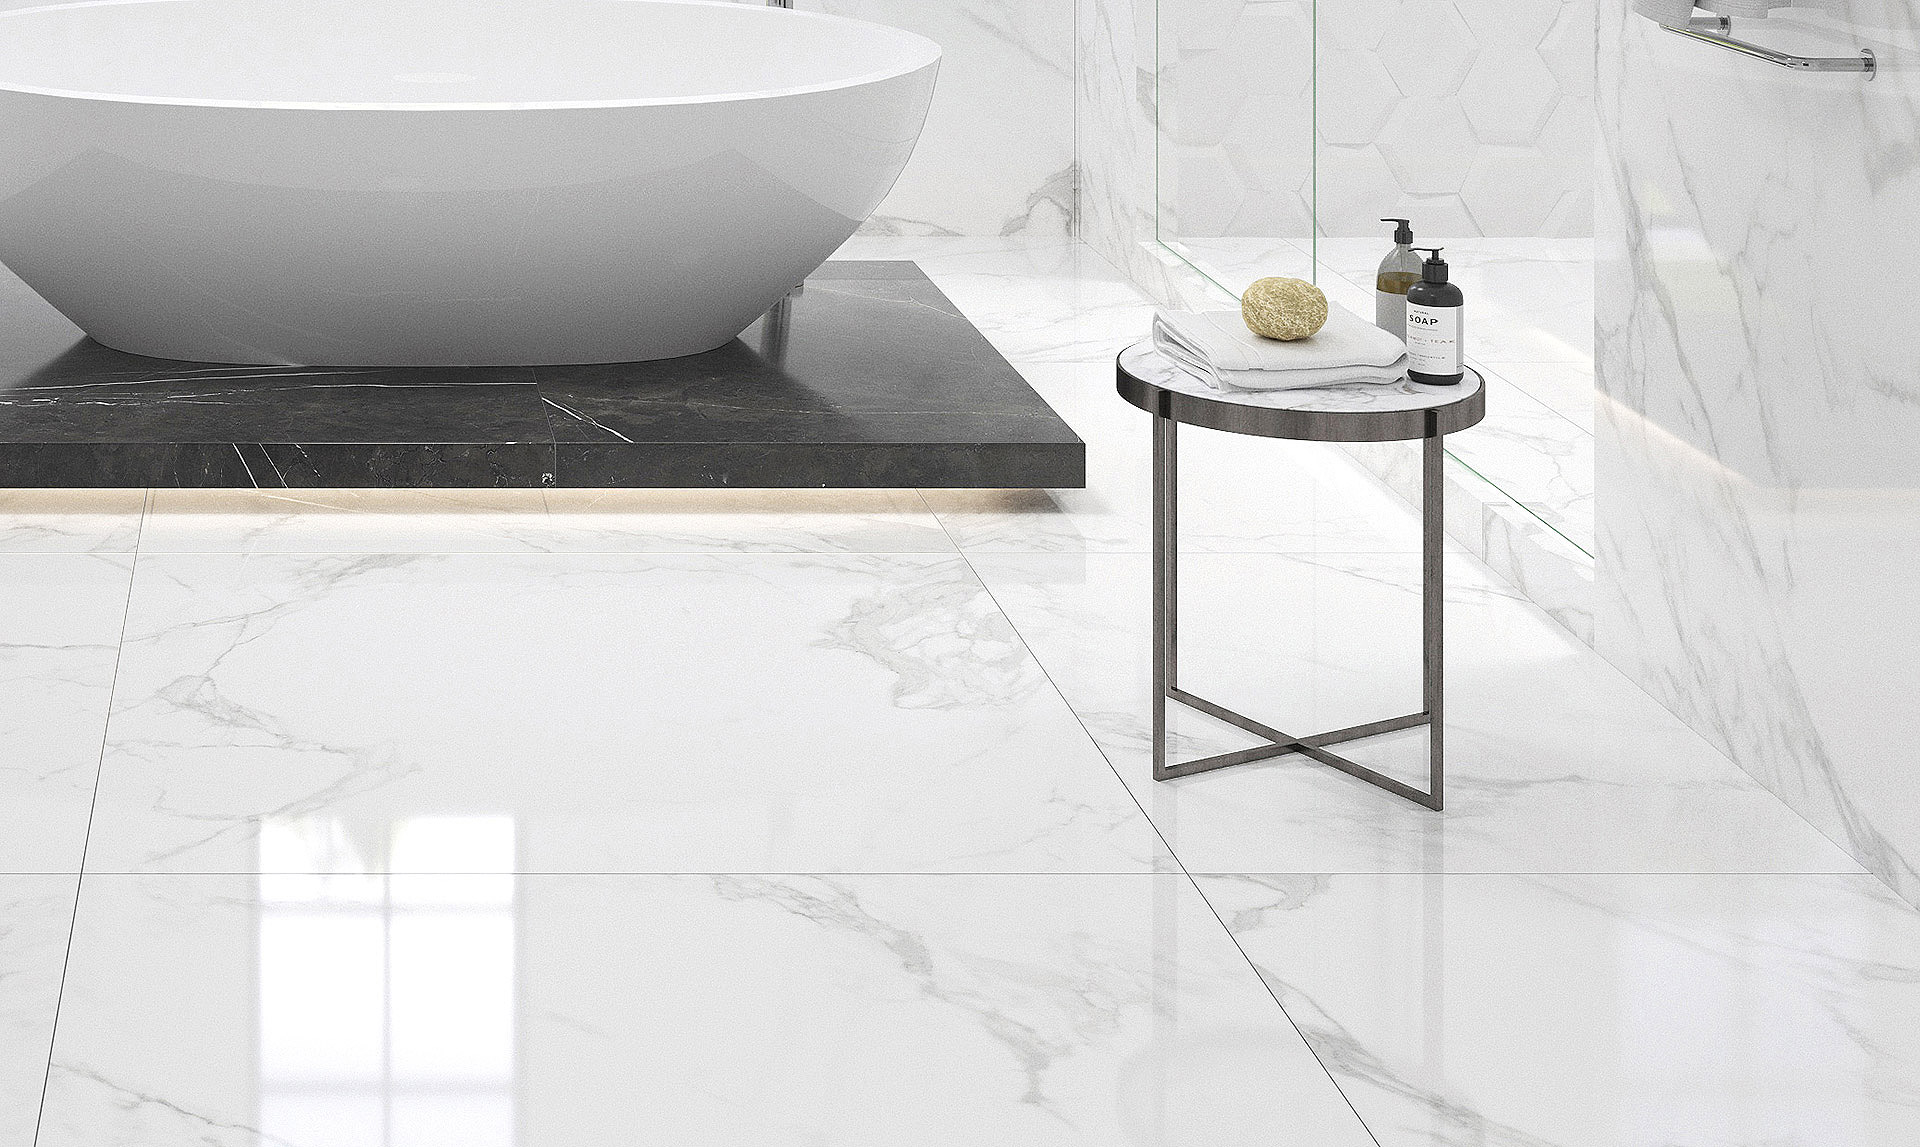 GRECIA PEARL POLISHED White Marble tile   120 x 120 cm